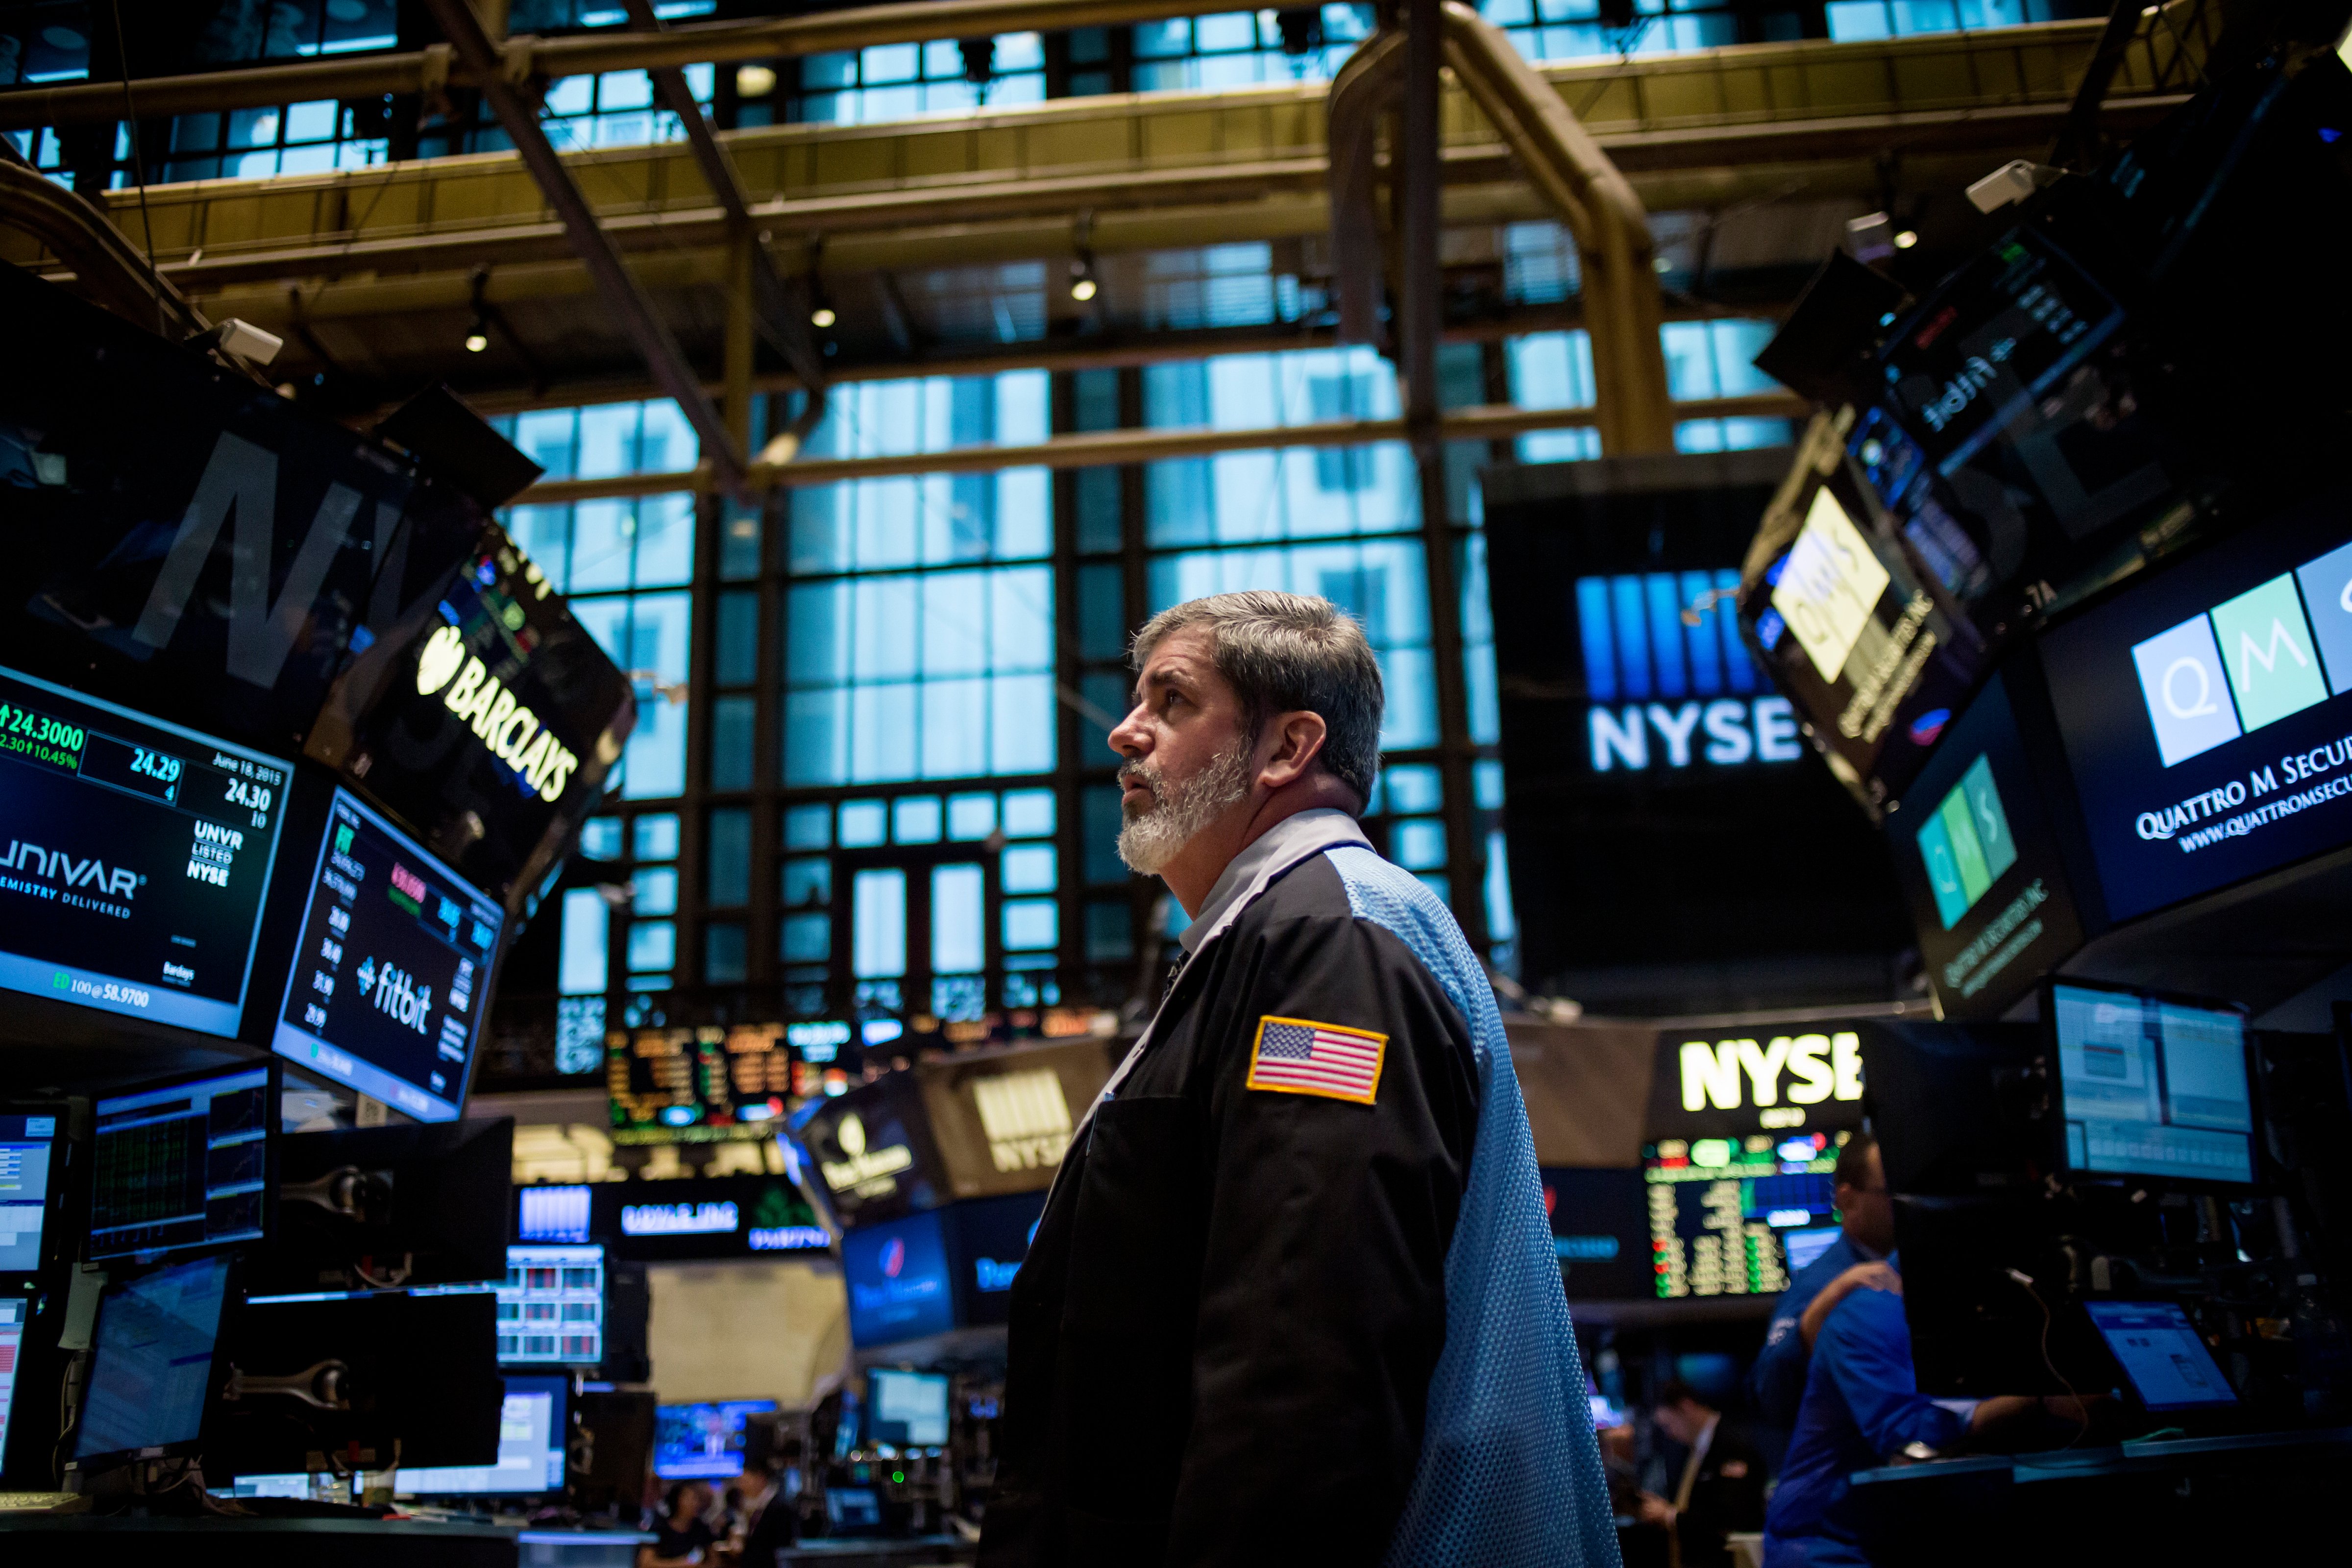 A trader on the floor of the New York Stock Exchange. (Eric Thayer)